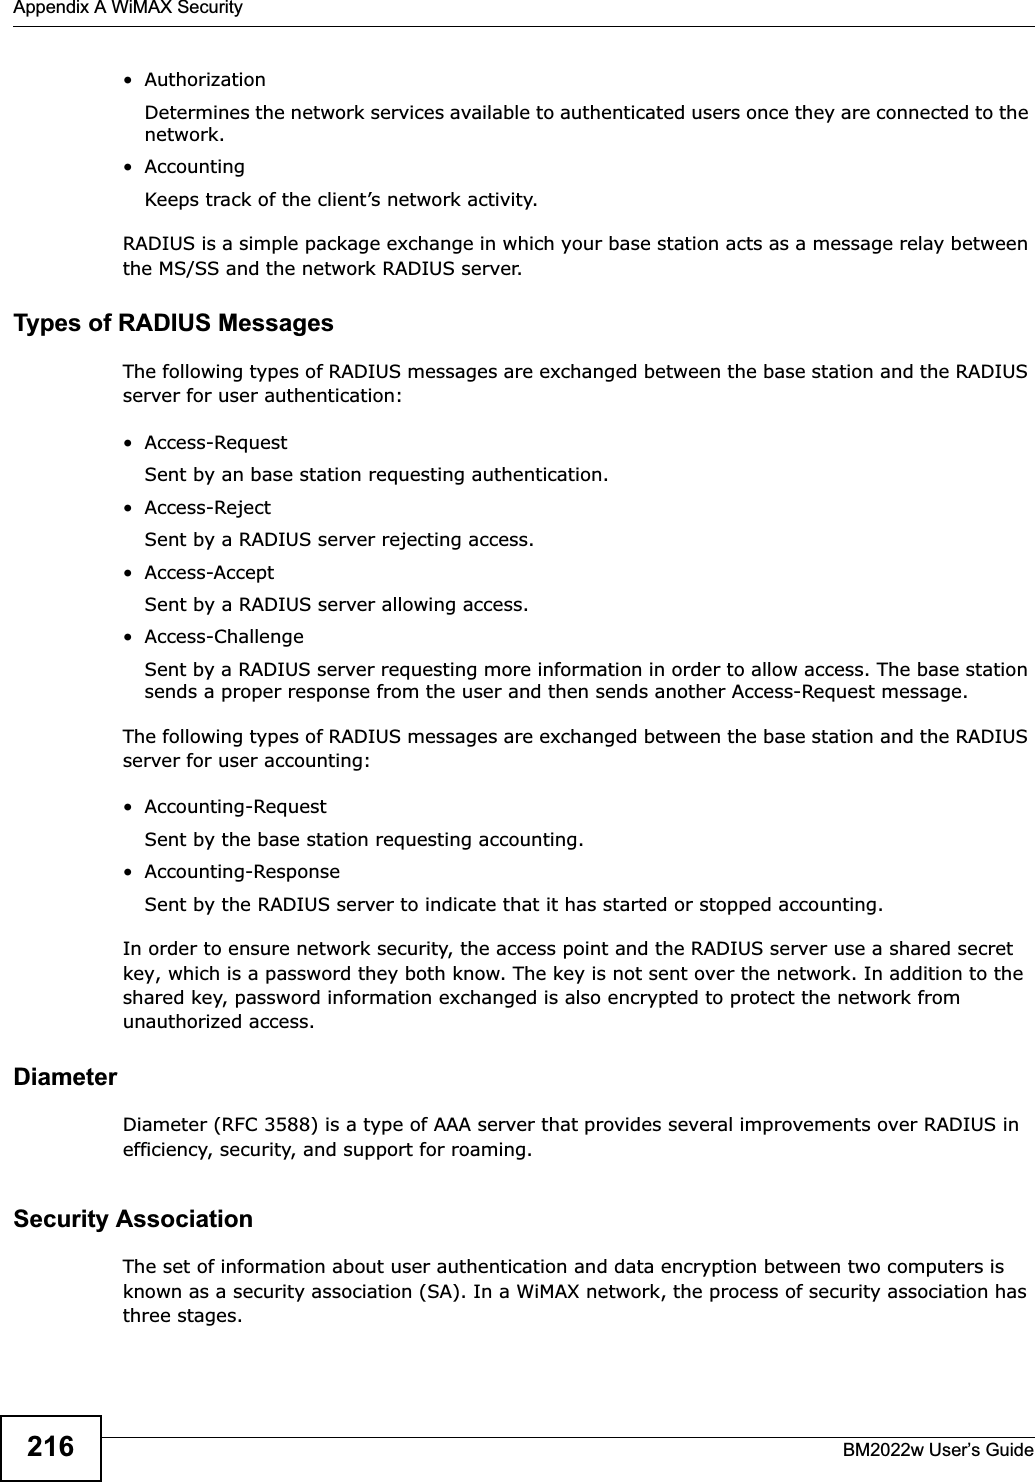 Appendix A WiMAX SecurityBM2022w User’s Guide216•AuthorizationDetermines the network services available to authenticated users once they are connected to the network.• AccountingKeeps track of the client’s network activity. RADIUS is a simple package exchange in which your base station acts as a message relay between the MS/SS and the network RADIUS server. Types of RADIUS MessagesThe following types of RADIUS messages are exchanged between the base station and the RADIUS server for user authentication:• Access-RequestSent by an base station requesting authentication.• Access-RejectSent by a RADIUS server rejecting access.• Access-AcceptSent by a RADIUS server allowing access. • Access-ChallengeSent by a RADIUS server requesting more information in order to allow access. The base station sends a proper response from the user and then sends another Access-Request message. The following types of RADIUS messages are exchanged between the base station and the RADIUS server for user accounting:• Accounting-RequestSent by the base station requesting accounting.• Accounting-ResponseSent by the RADIUS server to indicate that it has started or stopped accounting. In order to ensure network security, the access point and the RADIUS server use a shared secret key, which is a password they both know. The key is not sent over the network. In addition to the shared key, password information exchanged is also encrypted to protect the network from unauthorized access. DiameterDiameter (RFC 3588) is a type of AAA server that provides several improvements over RADIUS in efficiency, security, and support for roaming. Security AssociationThe set of information about user authentication and data encryption between two computers is known as a security association (SA). In a WiMAX network, the process of security association has three stages.